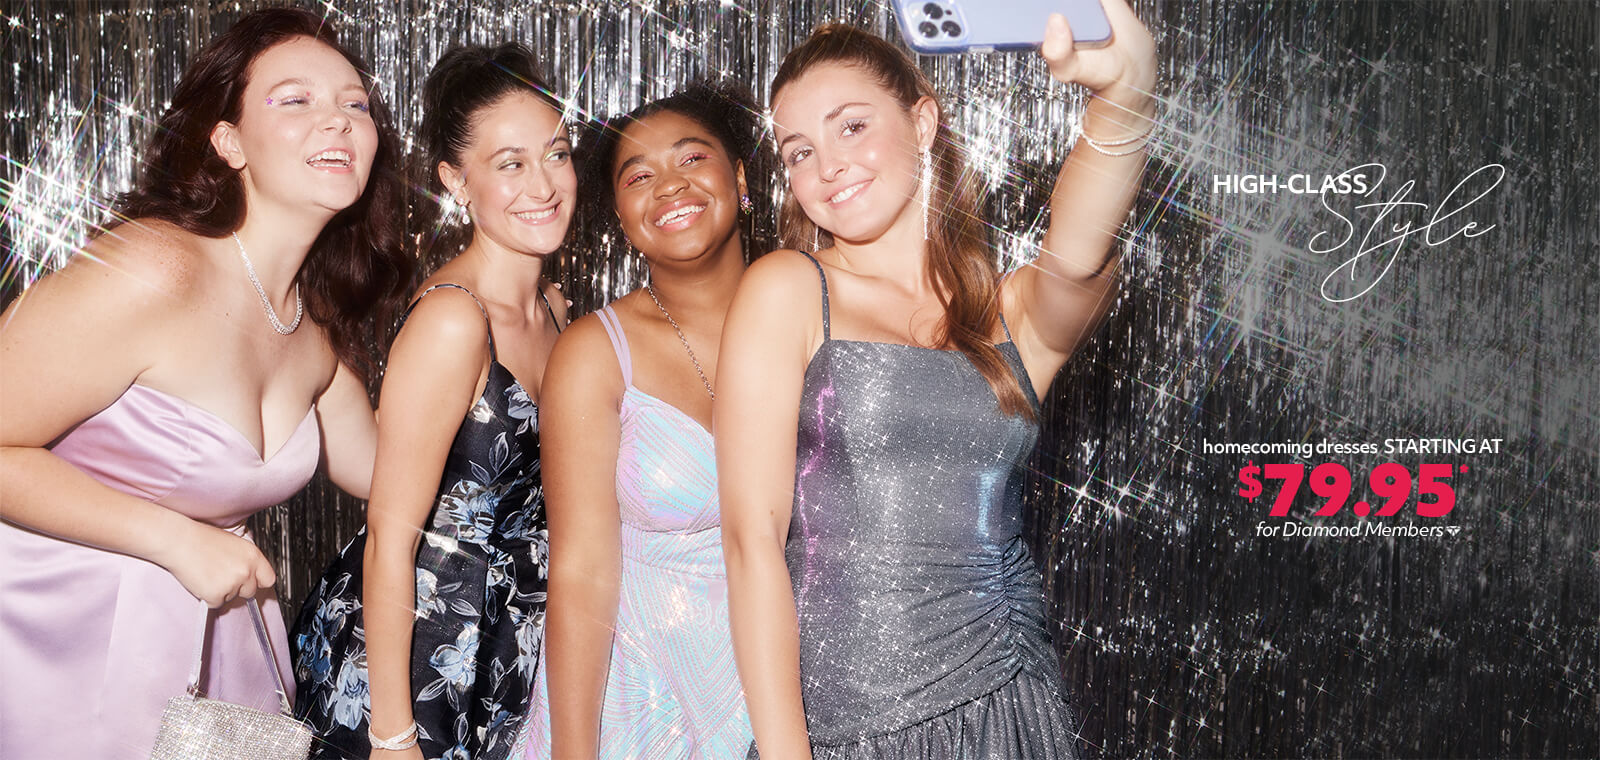 extra 50% off all clearance party and bridesmaid dresses now starting at $34.99